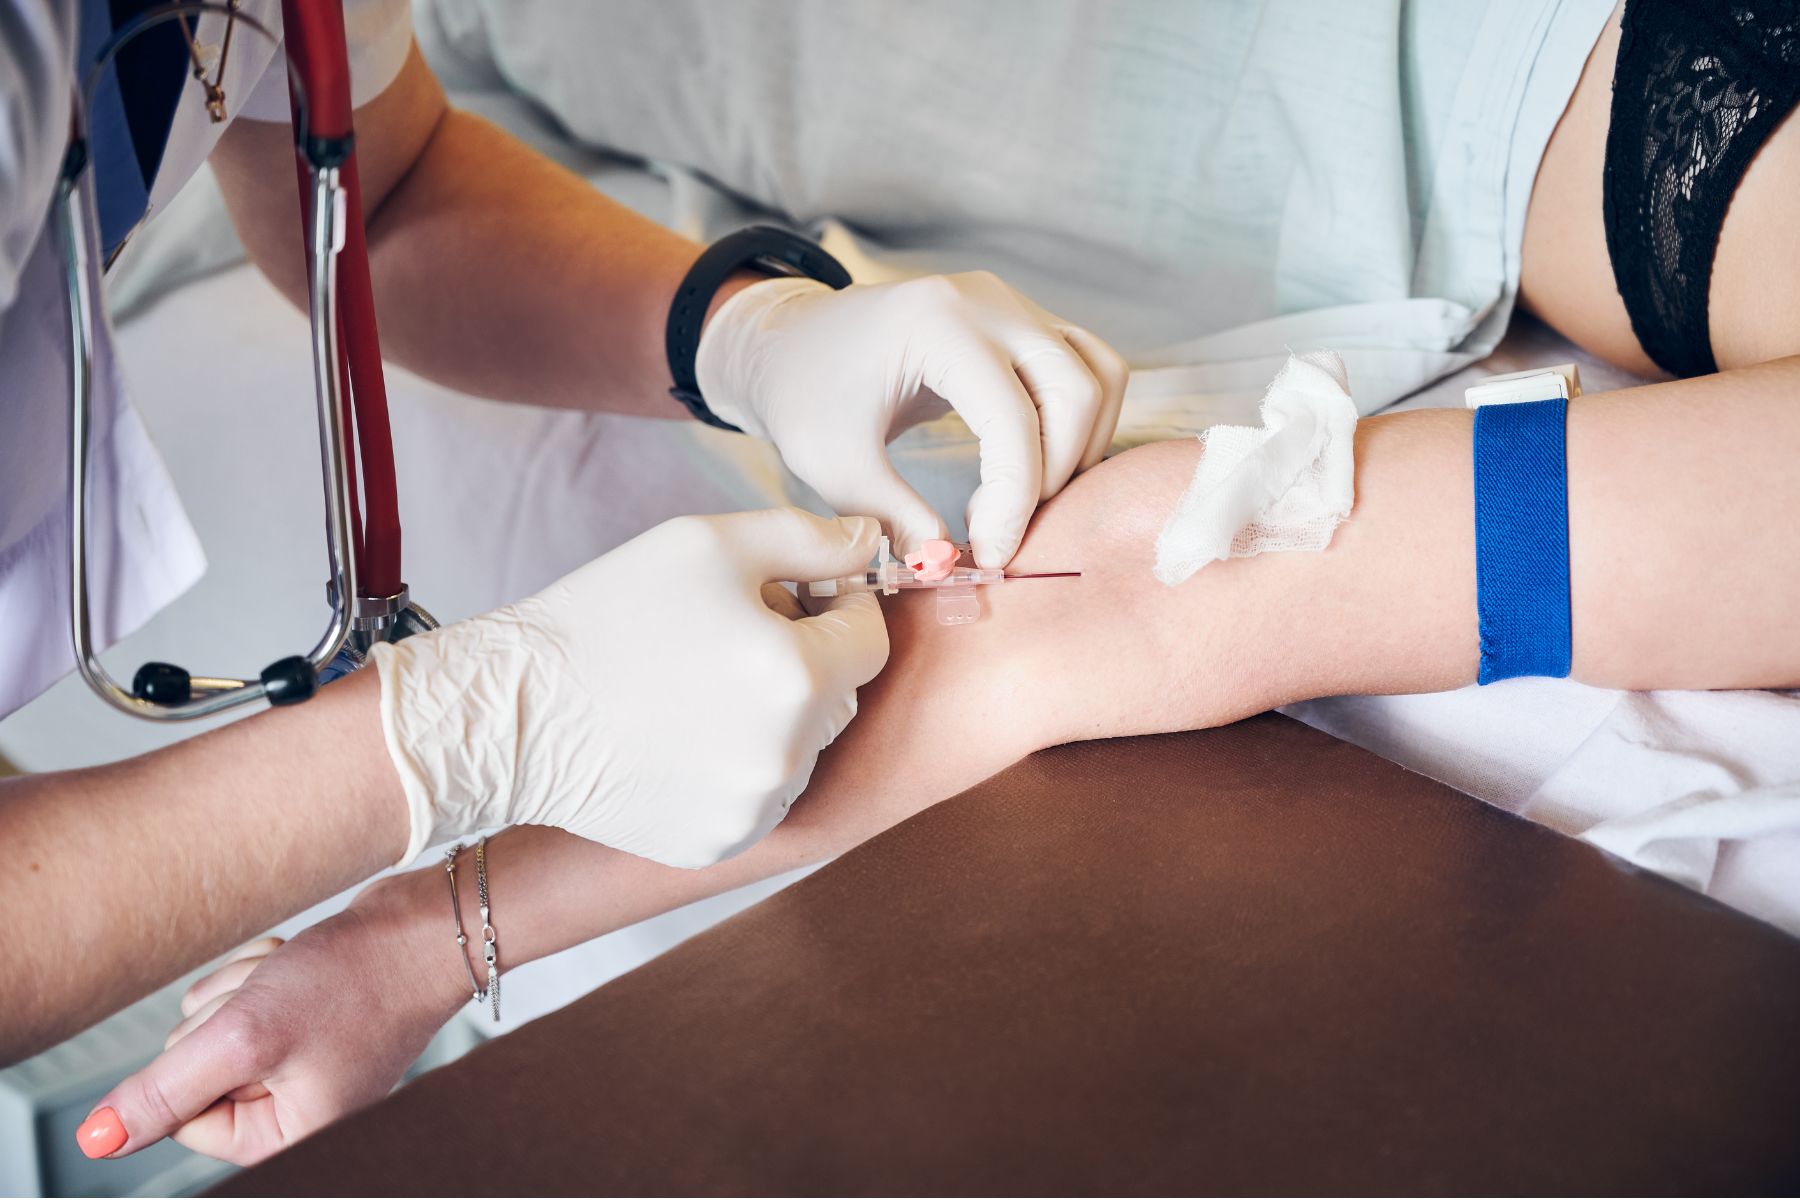 Deciding to Receive IV Sedation for Your Dentistry Treatment